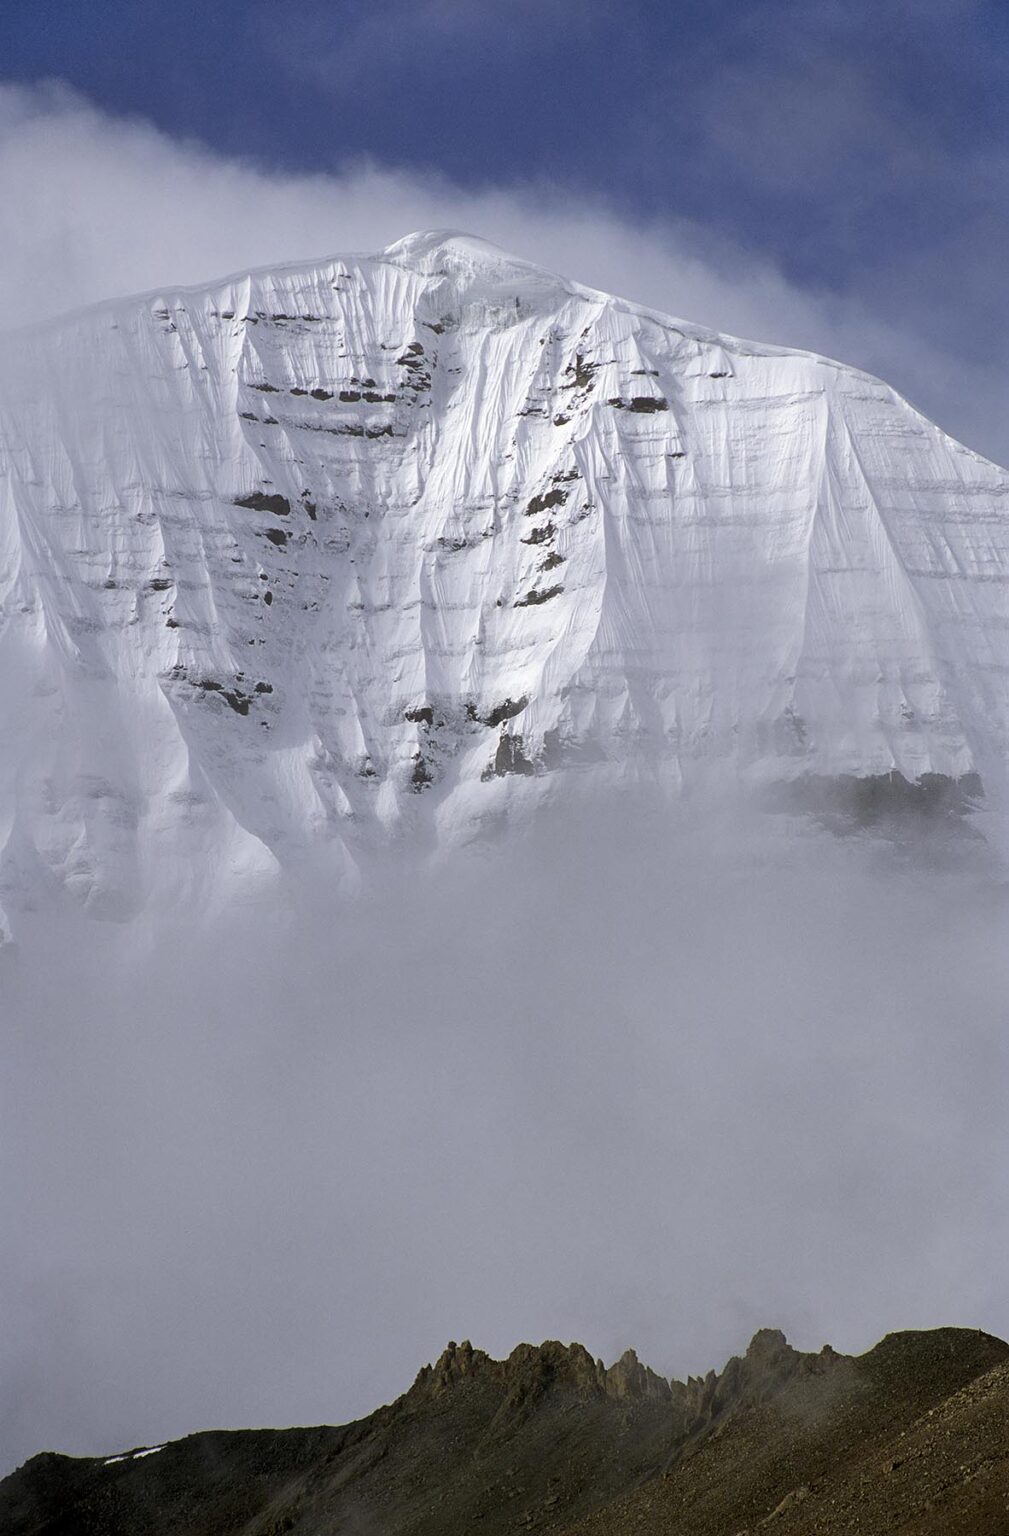 The mist enshrouded North Face of MOUNT KAILASH (6638 M) is a sacred site for BUDDHIST and HINDU  PILGRIMS - TIBET